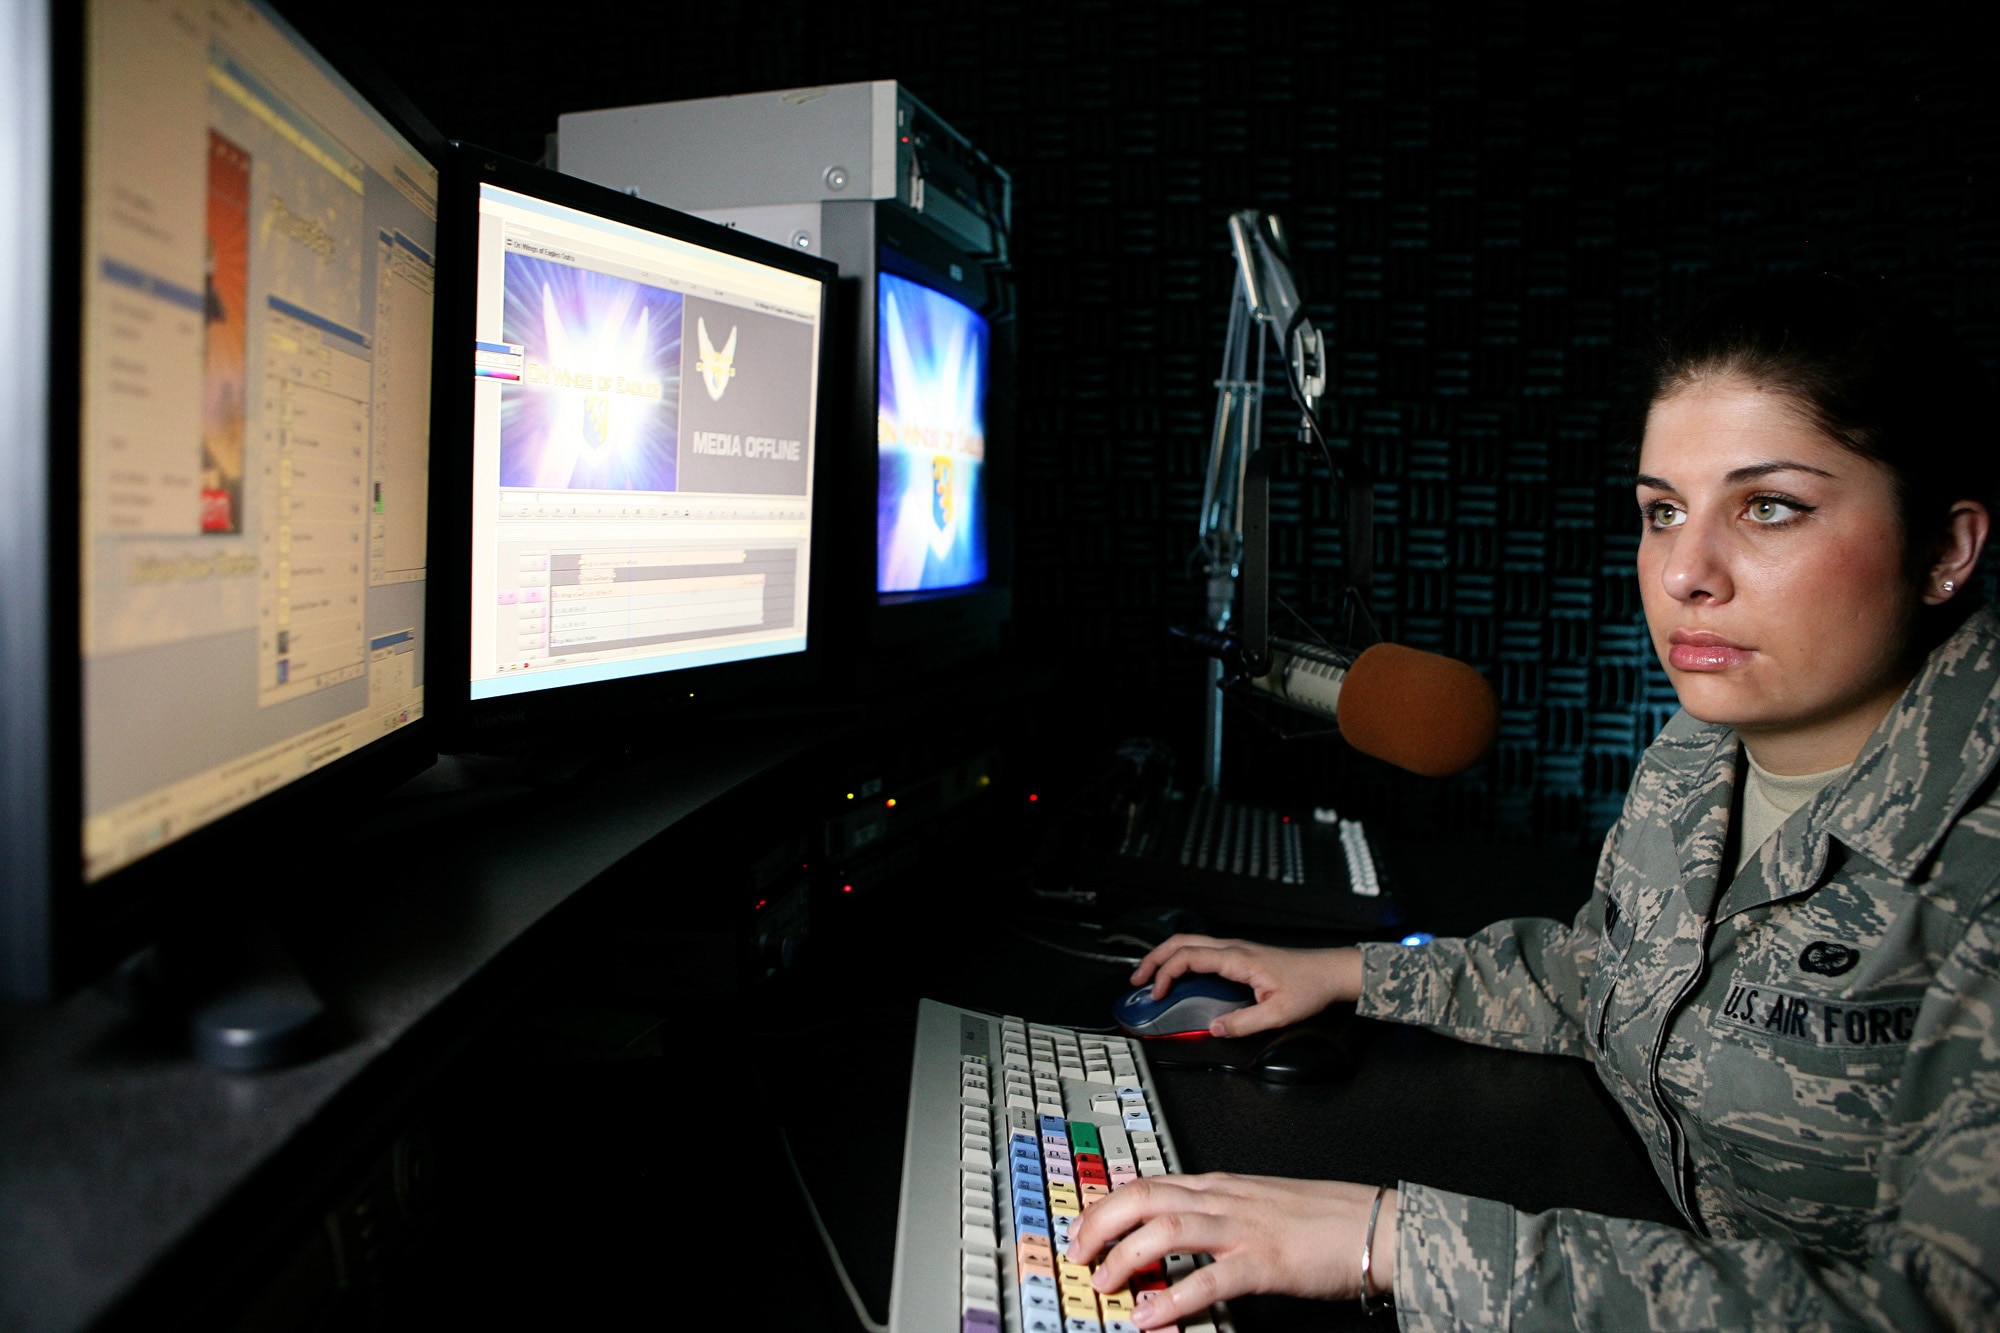 Airman Lauren Lagudi, a radio DJ on American Forces Network Aviano, Defense Media Activity, edits a project in the AFN studio March 18. Airman Lagudi is one of five members of AFN Aviano who were recently recognized as among the best in Air Force broadcasting during the 2008 Air Force Media Contest. Airman Lagudi was recognized as the Air Force's Outstanding New Broadcaster. (U.S. Air Force photo/Senior Master Sgt. Robert Valenca) 